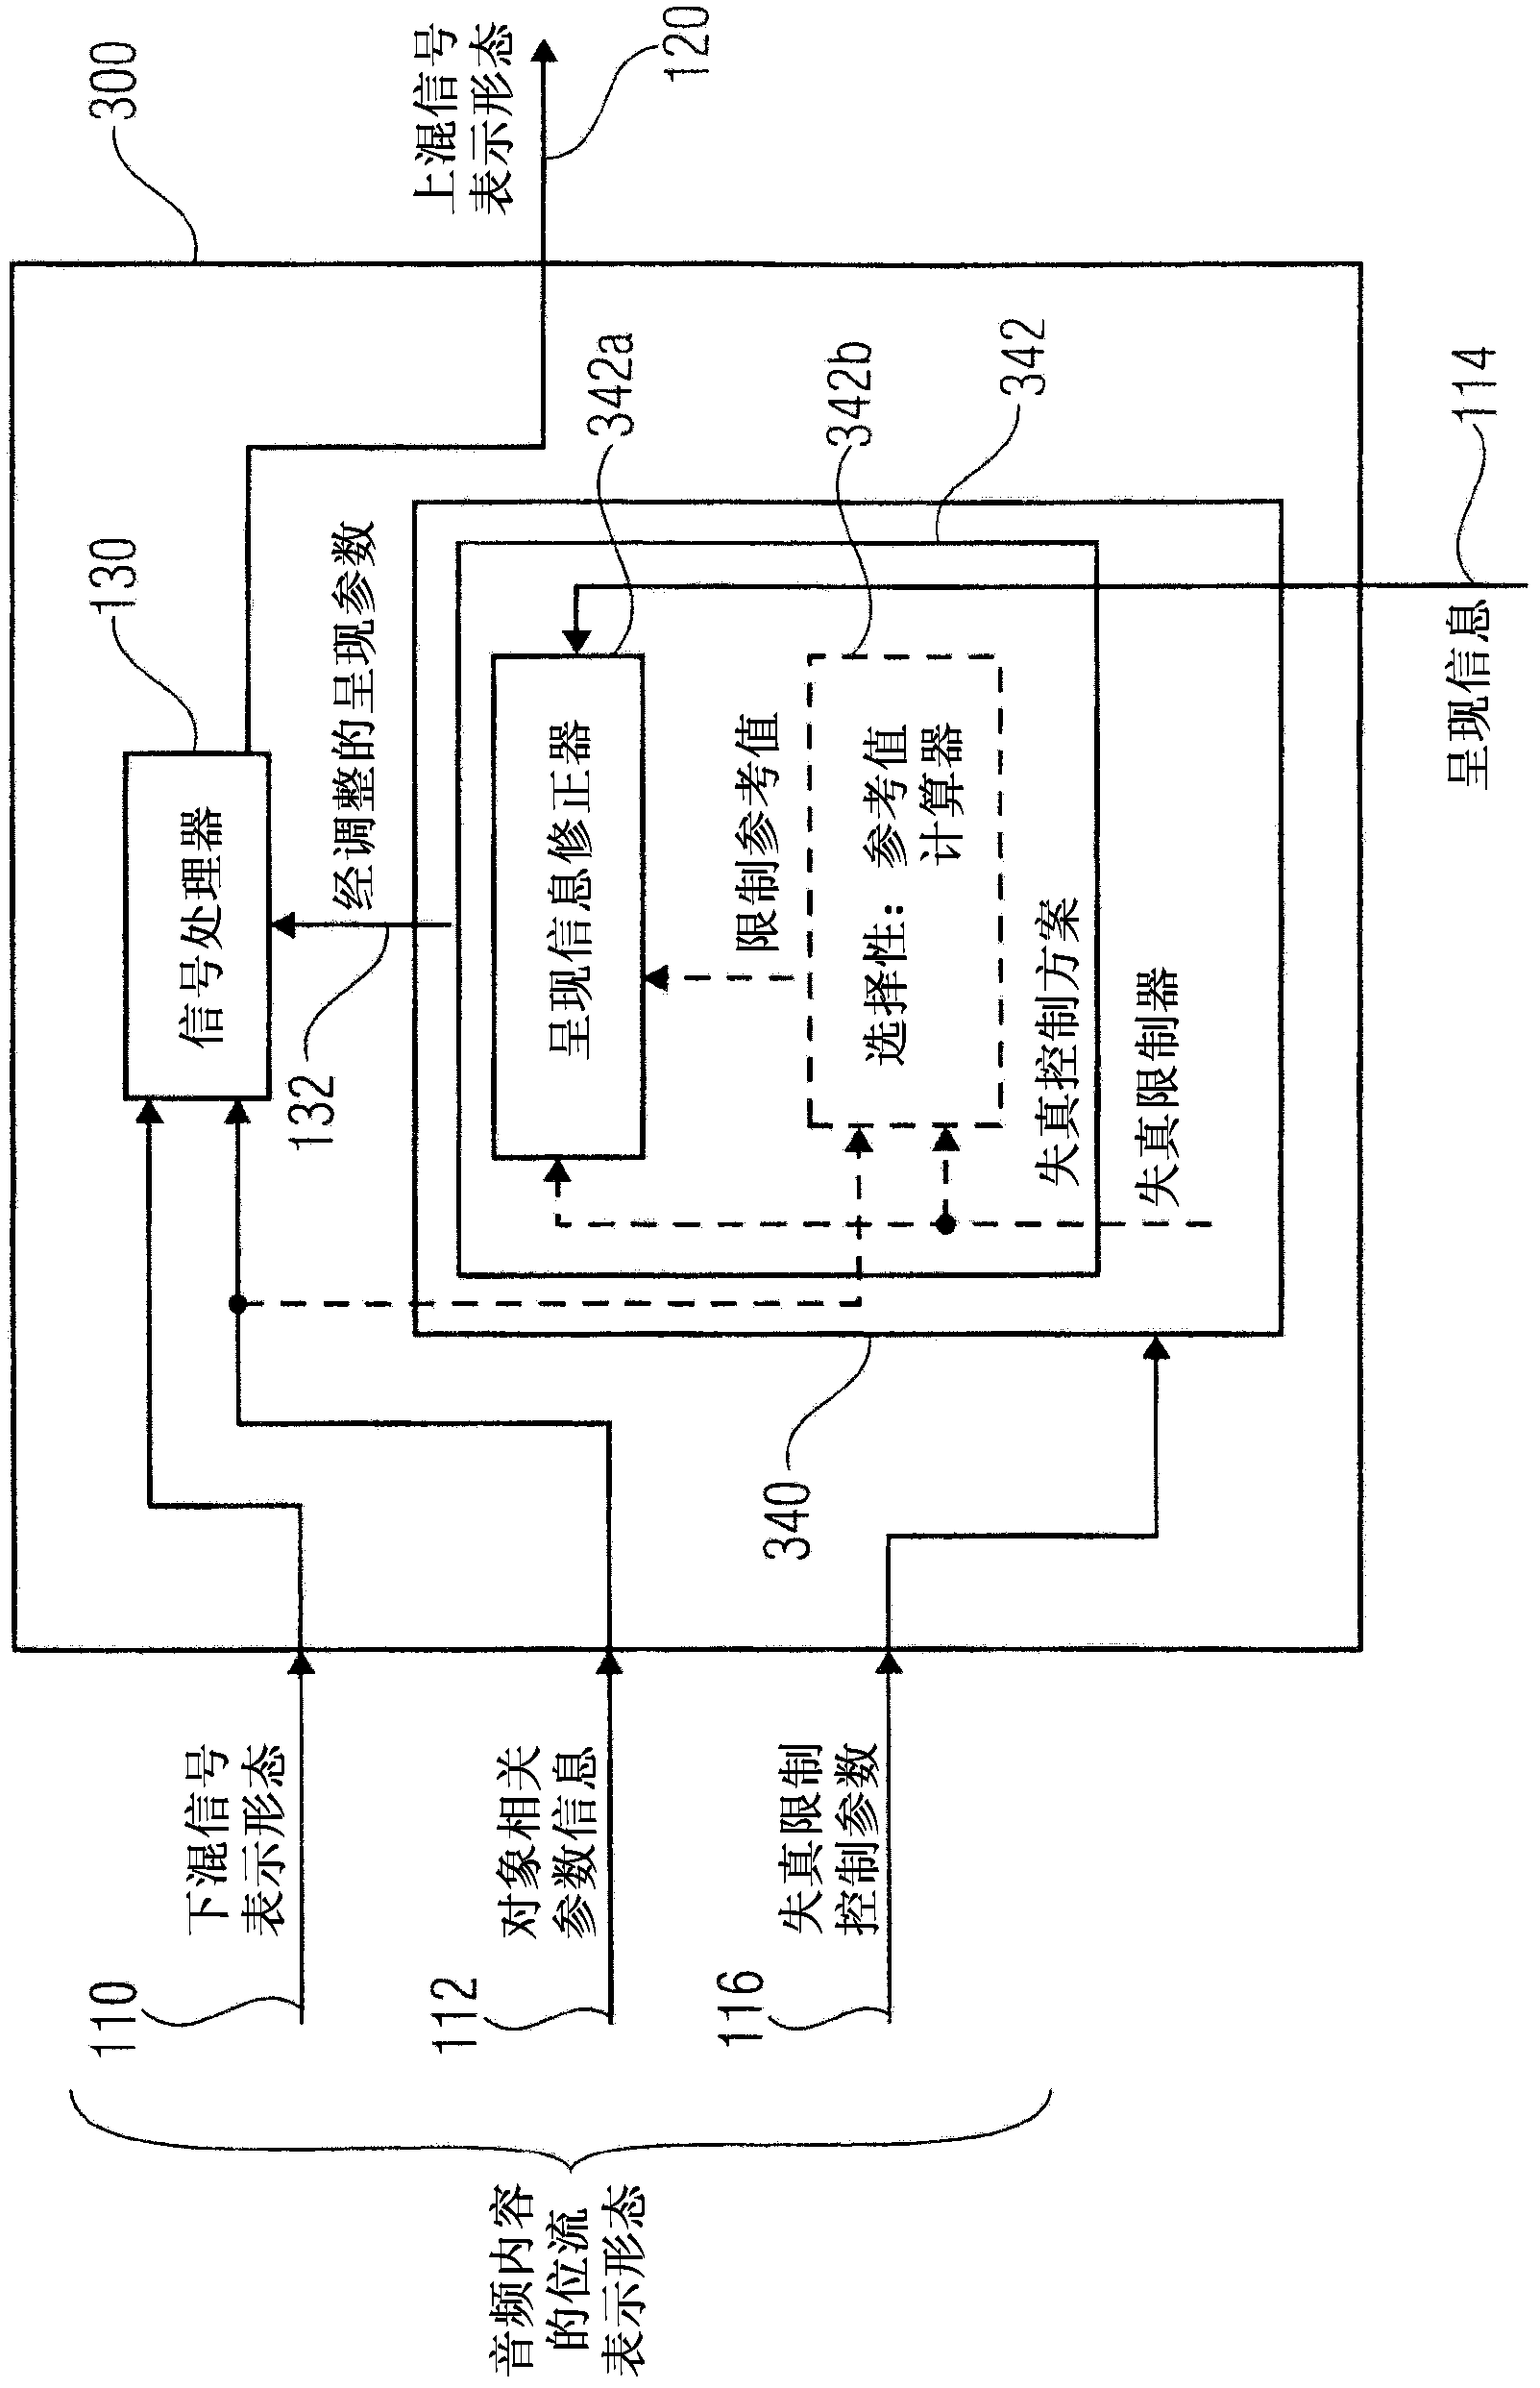 Apparatus for providing an upmix signal representation on the basis of a downmix signal representation, apparatus for providing a bitstream representing a multichannel audio signal, methods, computer program and bitstream using a distortion control signaling